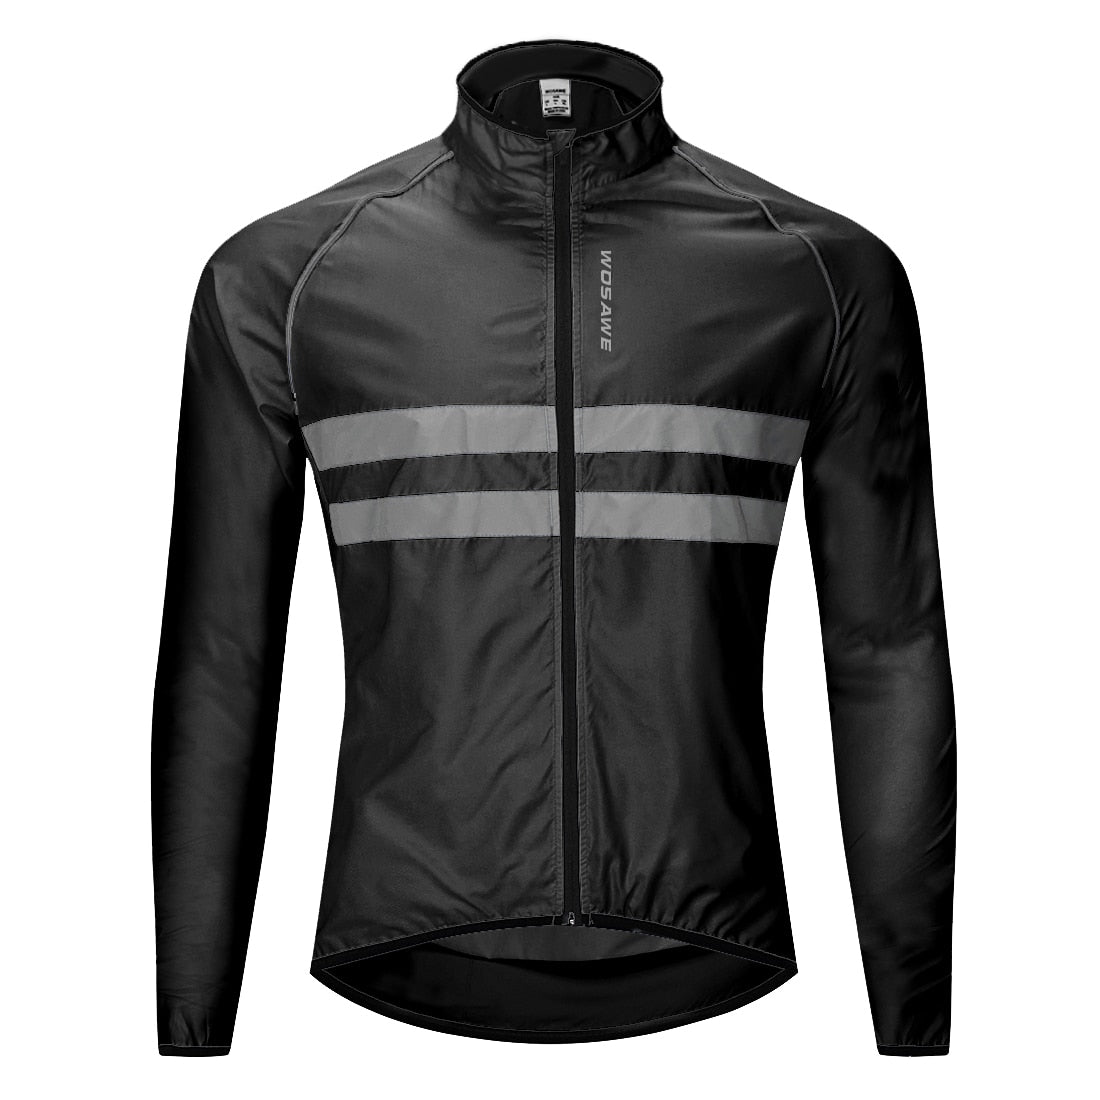 WOSAWE Thin Hooded Reflective Rain Repellent Jacket - Black / M - Sport Finesse